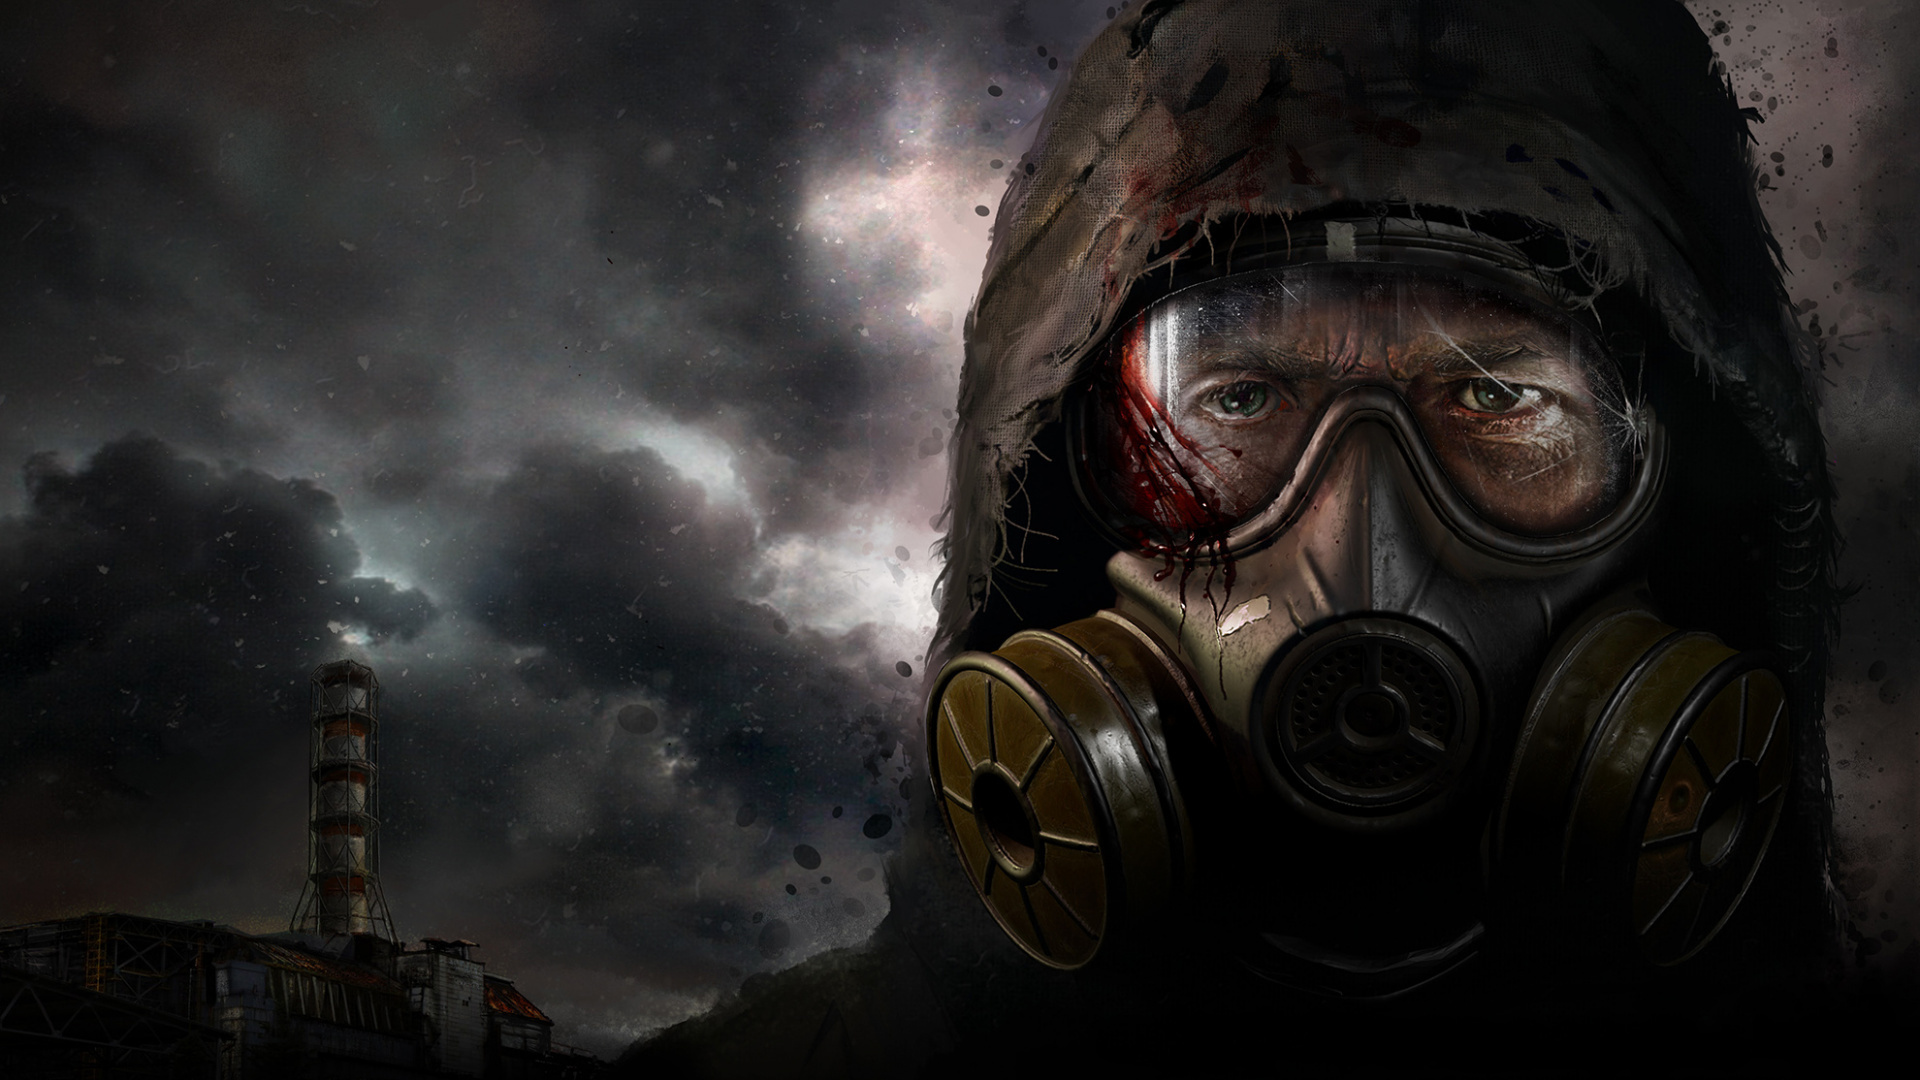 Gamers boycott S.T.A.L.K.E.R. 2: Heart of Chernobyl and urged to remove the game from Steam